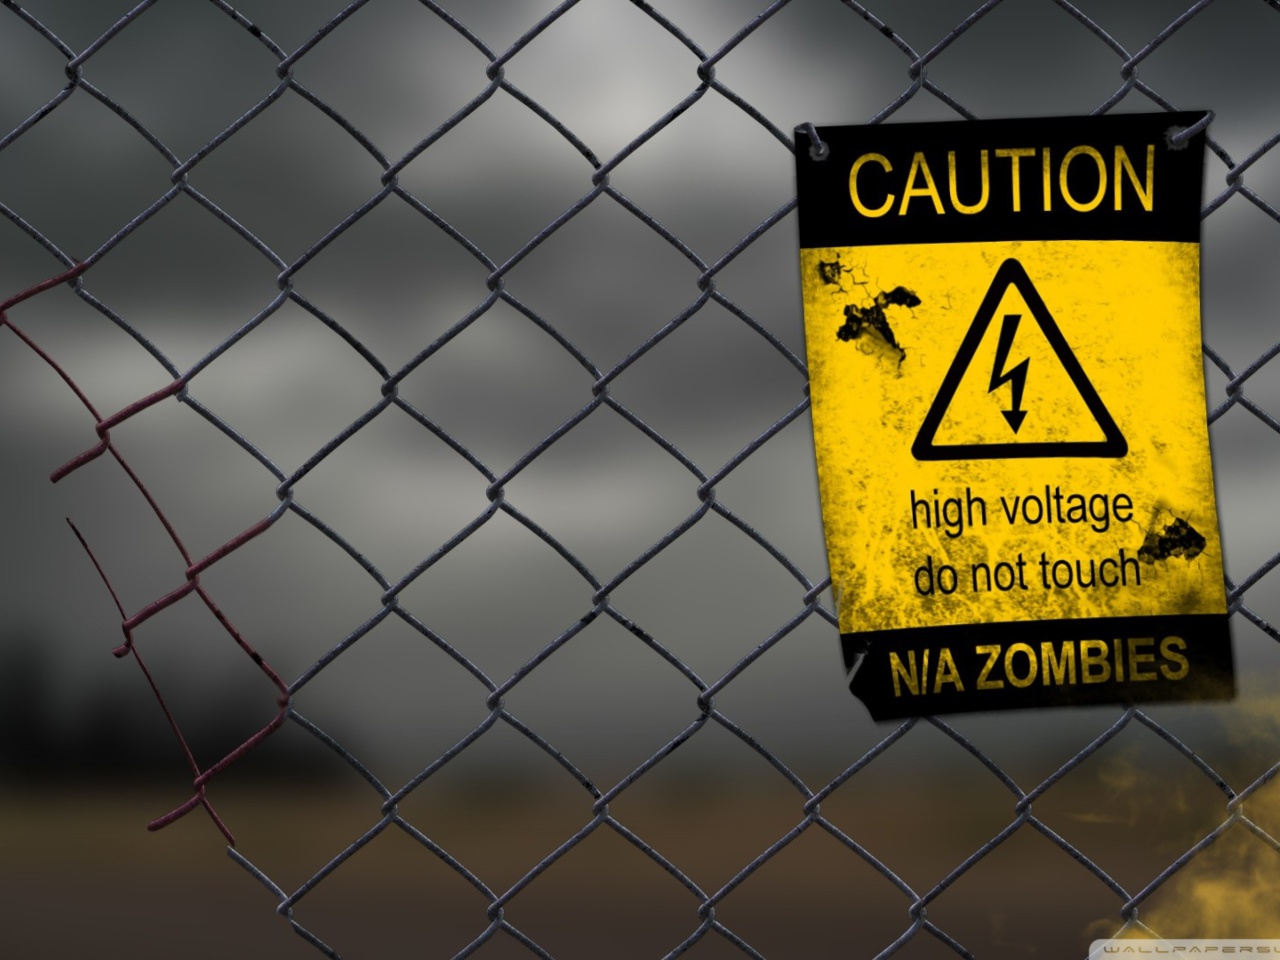 Caution Zombies, High voltage do not touch screenshot #1 1280x960